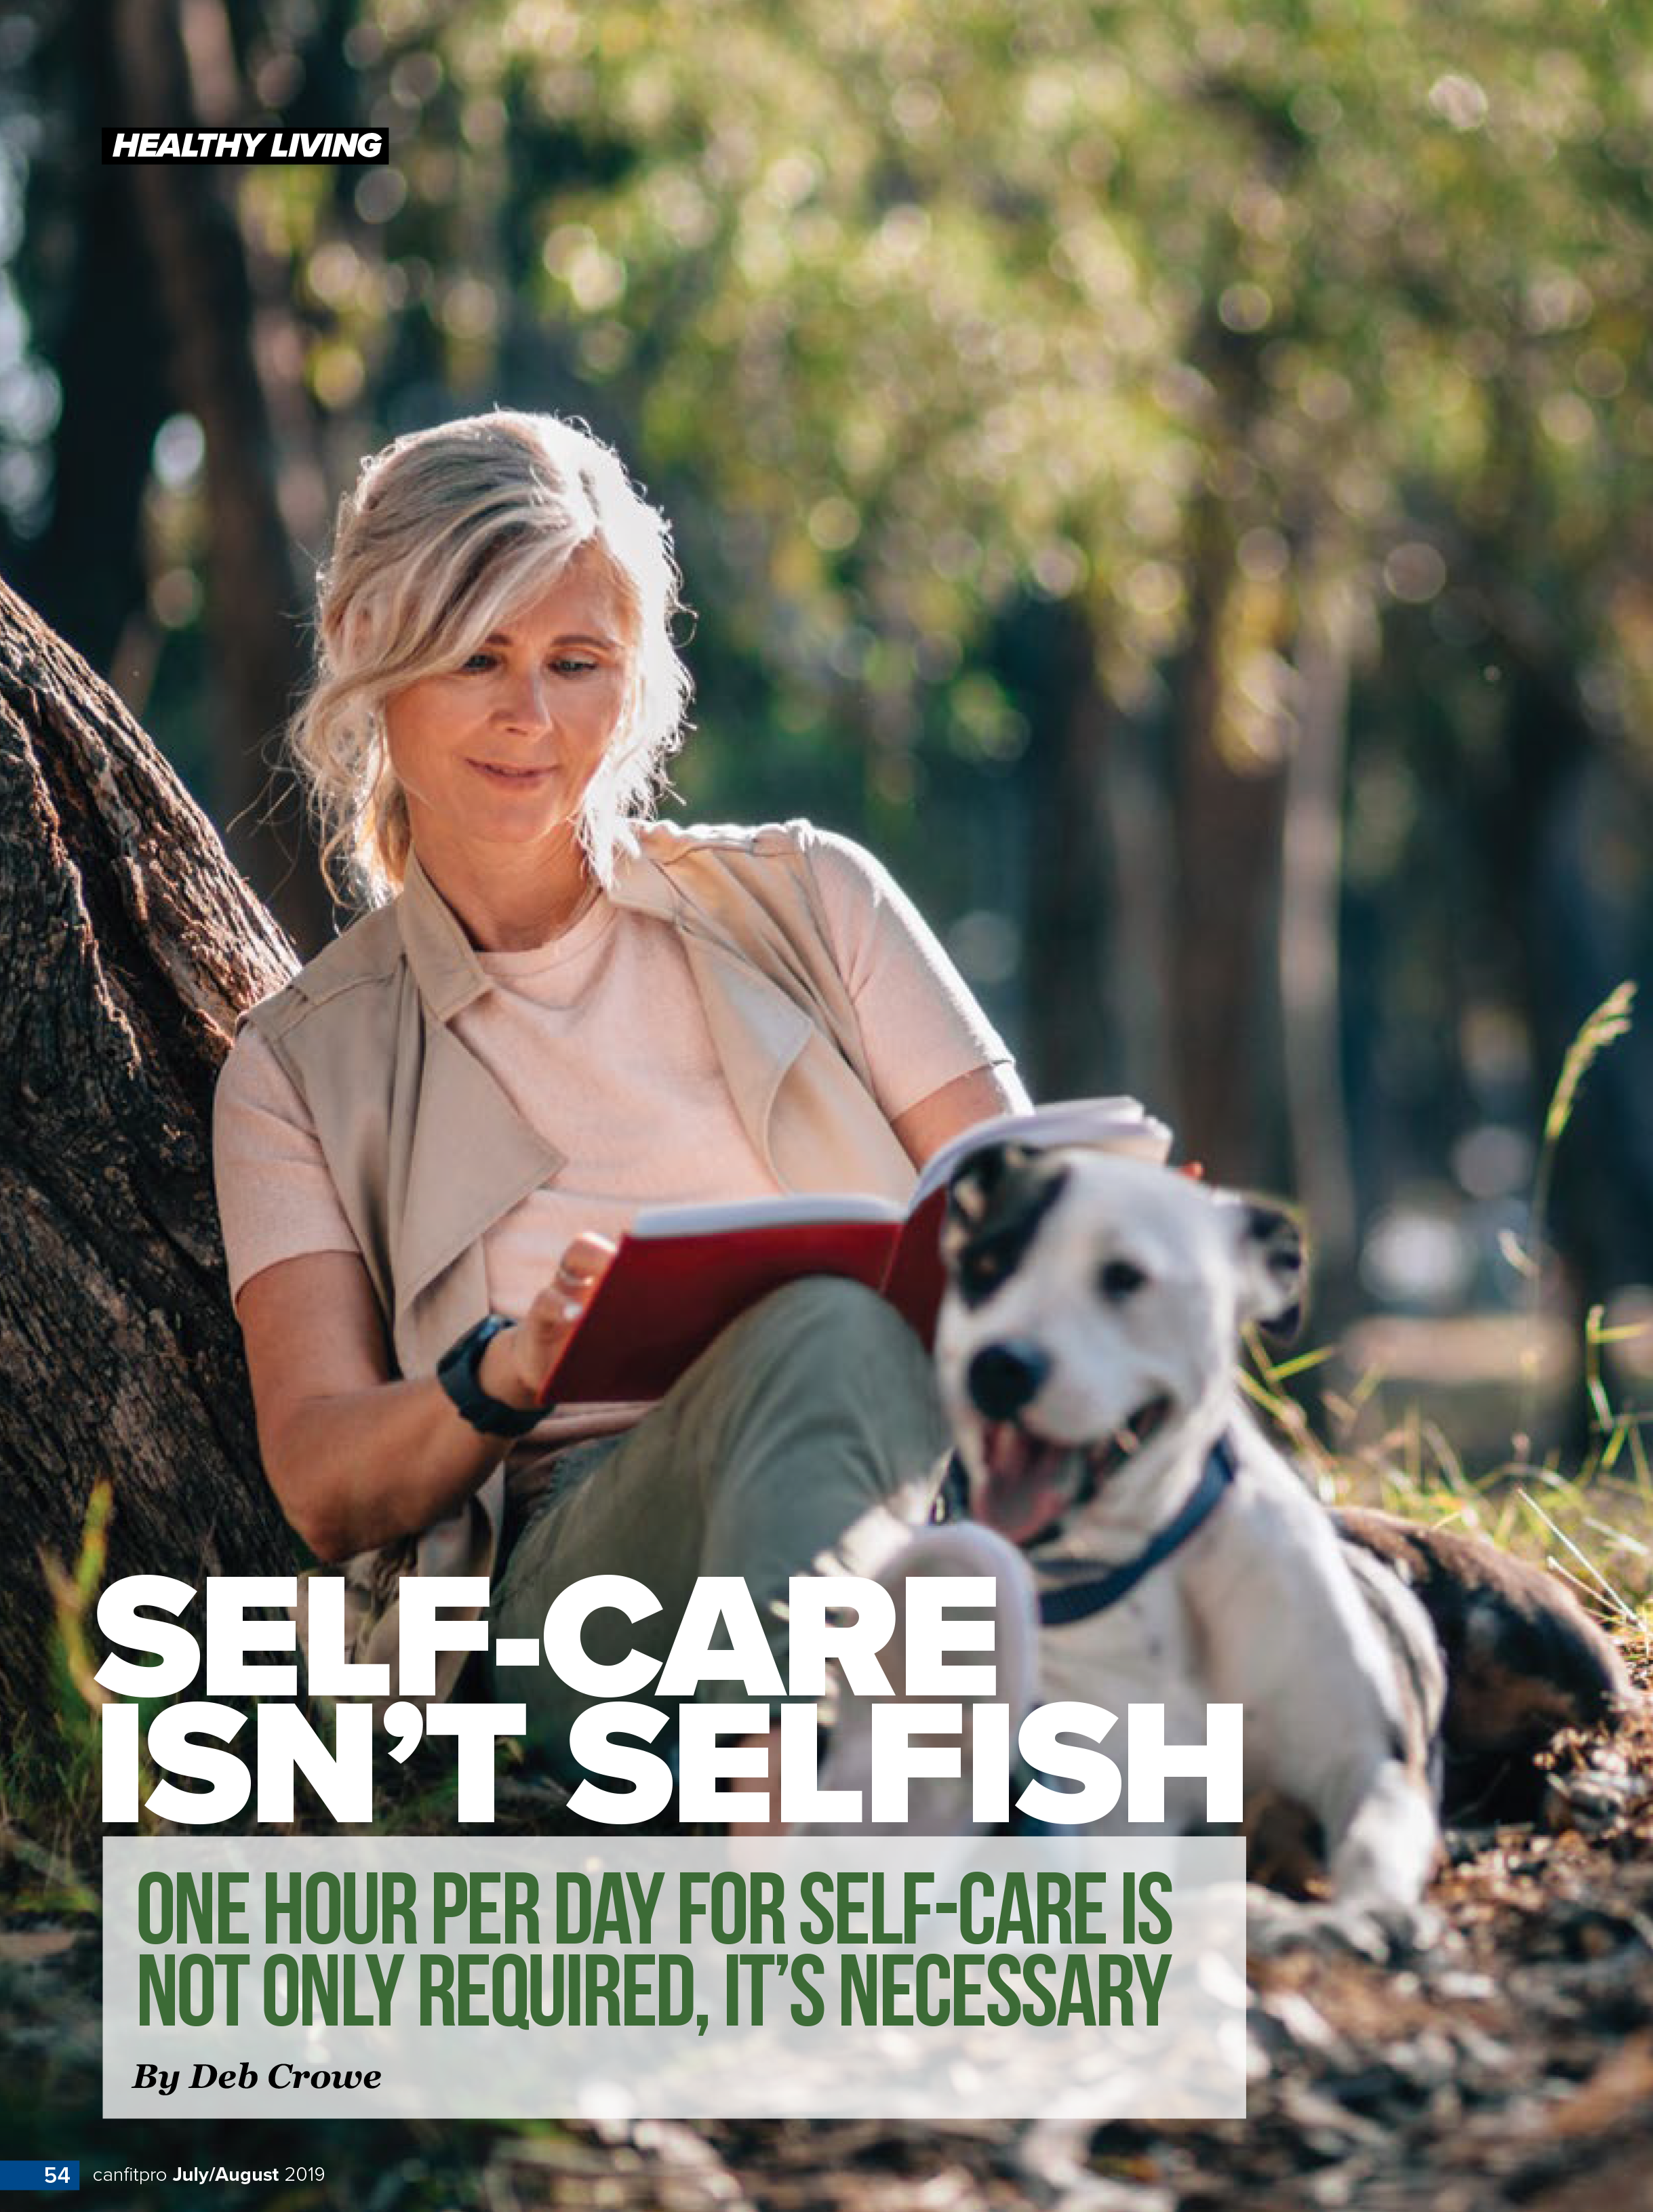 One Hour per Day for Self-Care Is Not Only Required – It’s Necessary